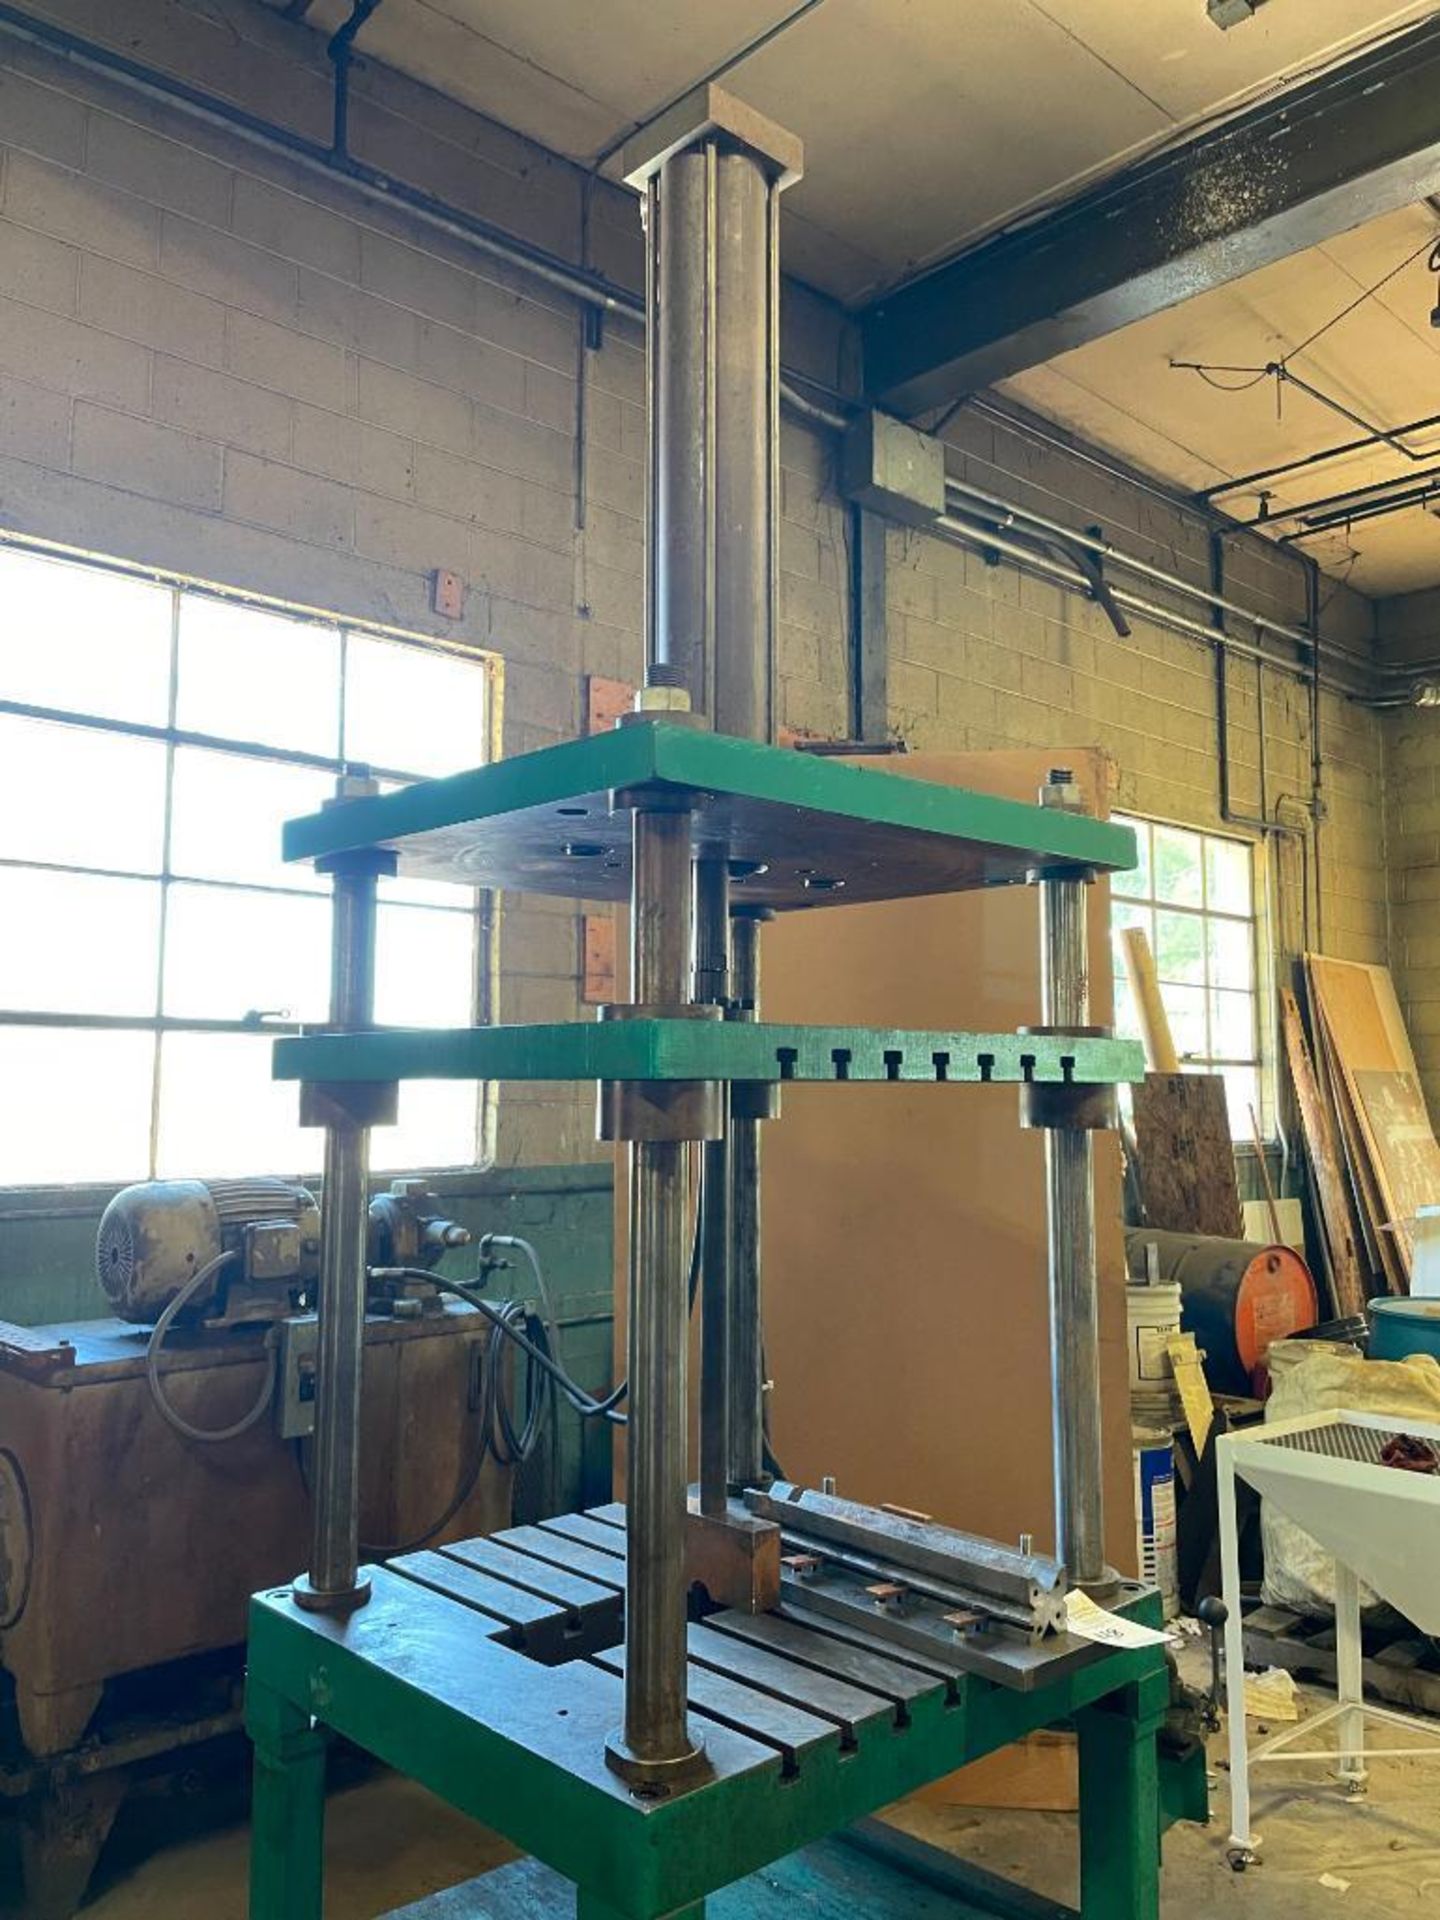 4 POST HYDRAULIC PRESS AND ACCESSORIES; $750 LOADING FEE - Image 5 of 7